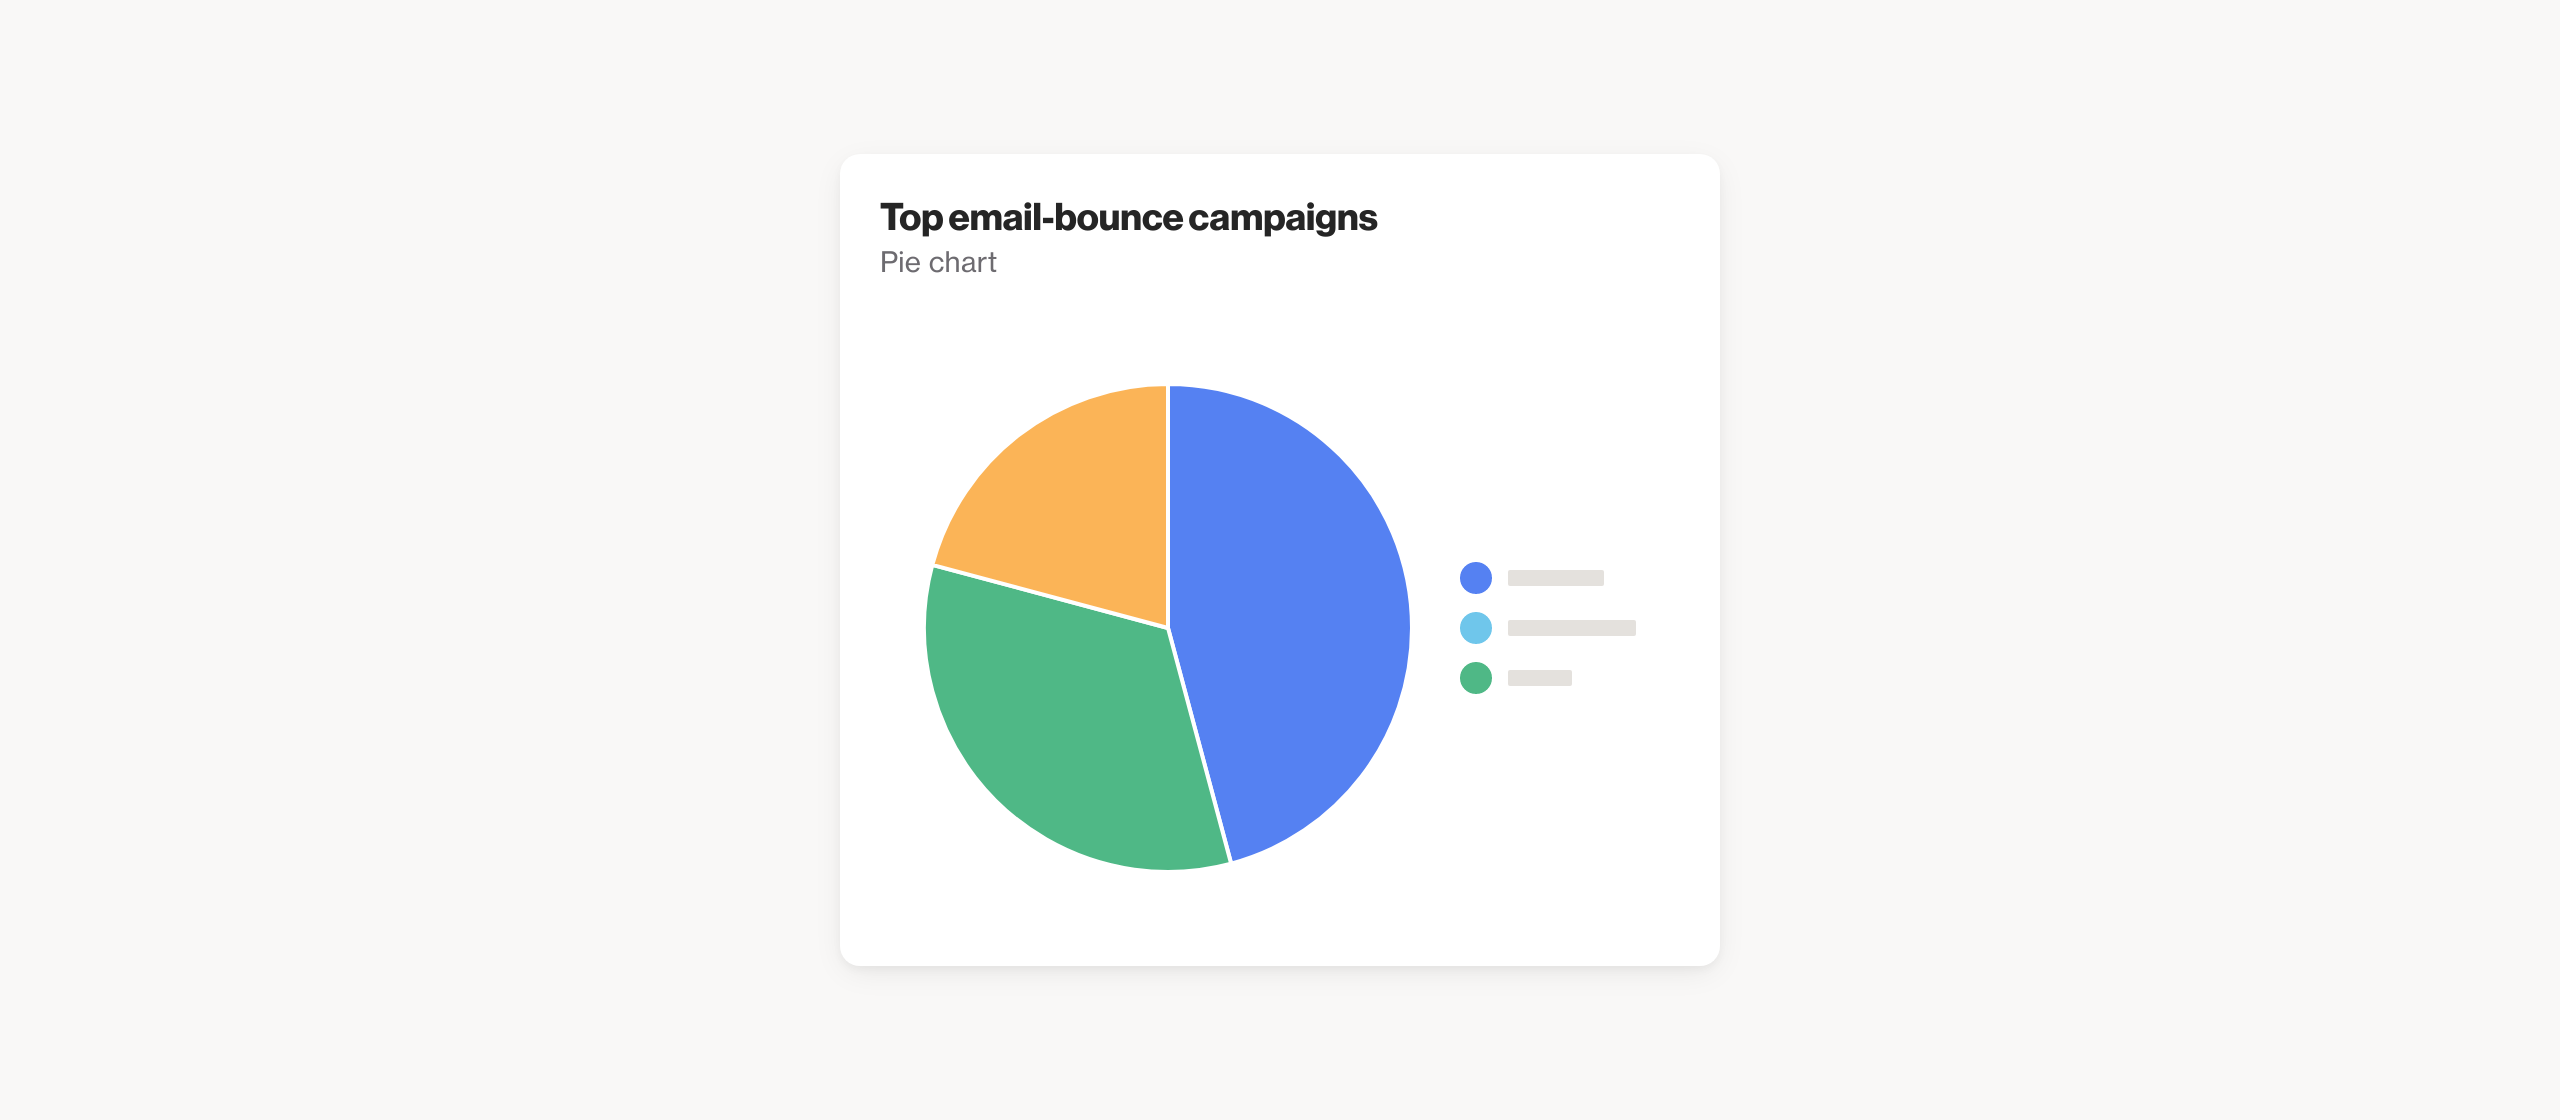 Top email-bounce campaigns